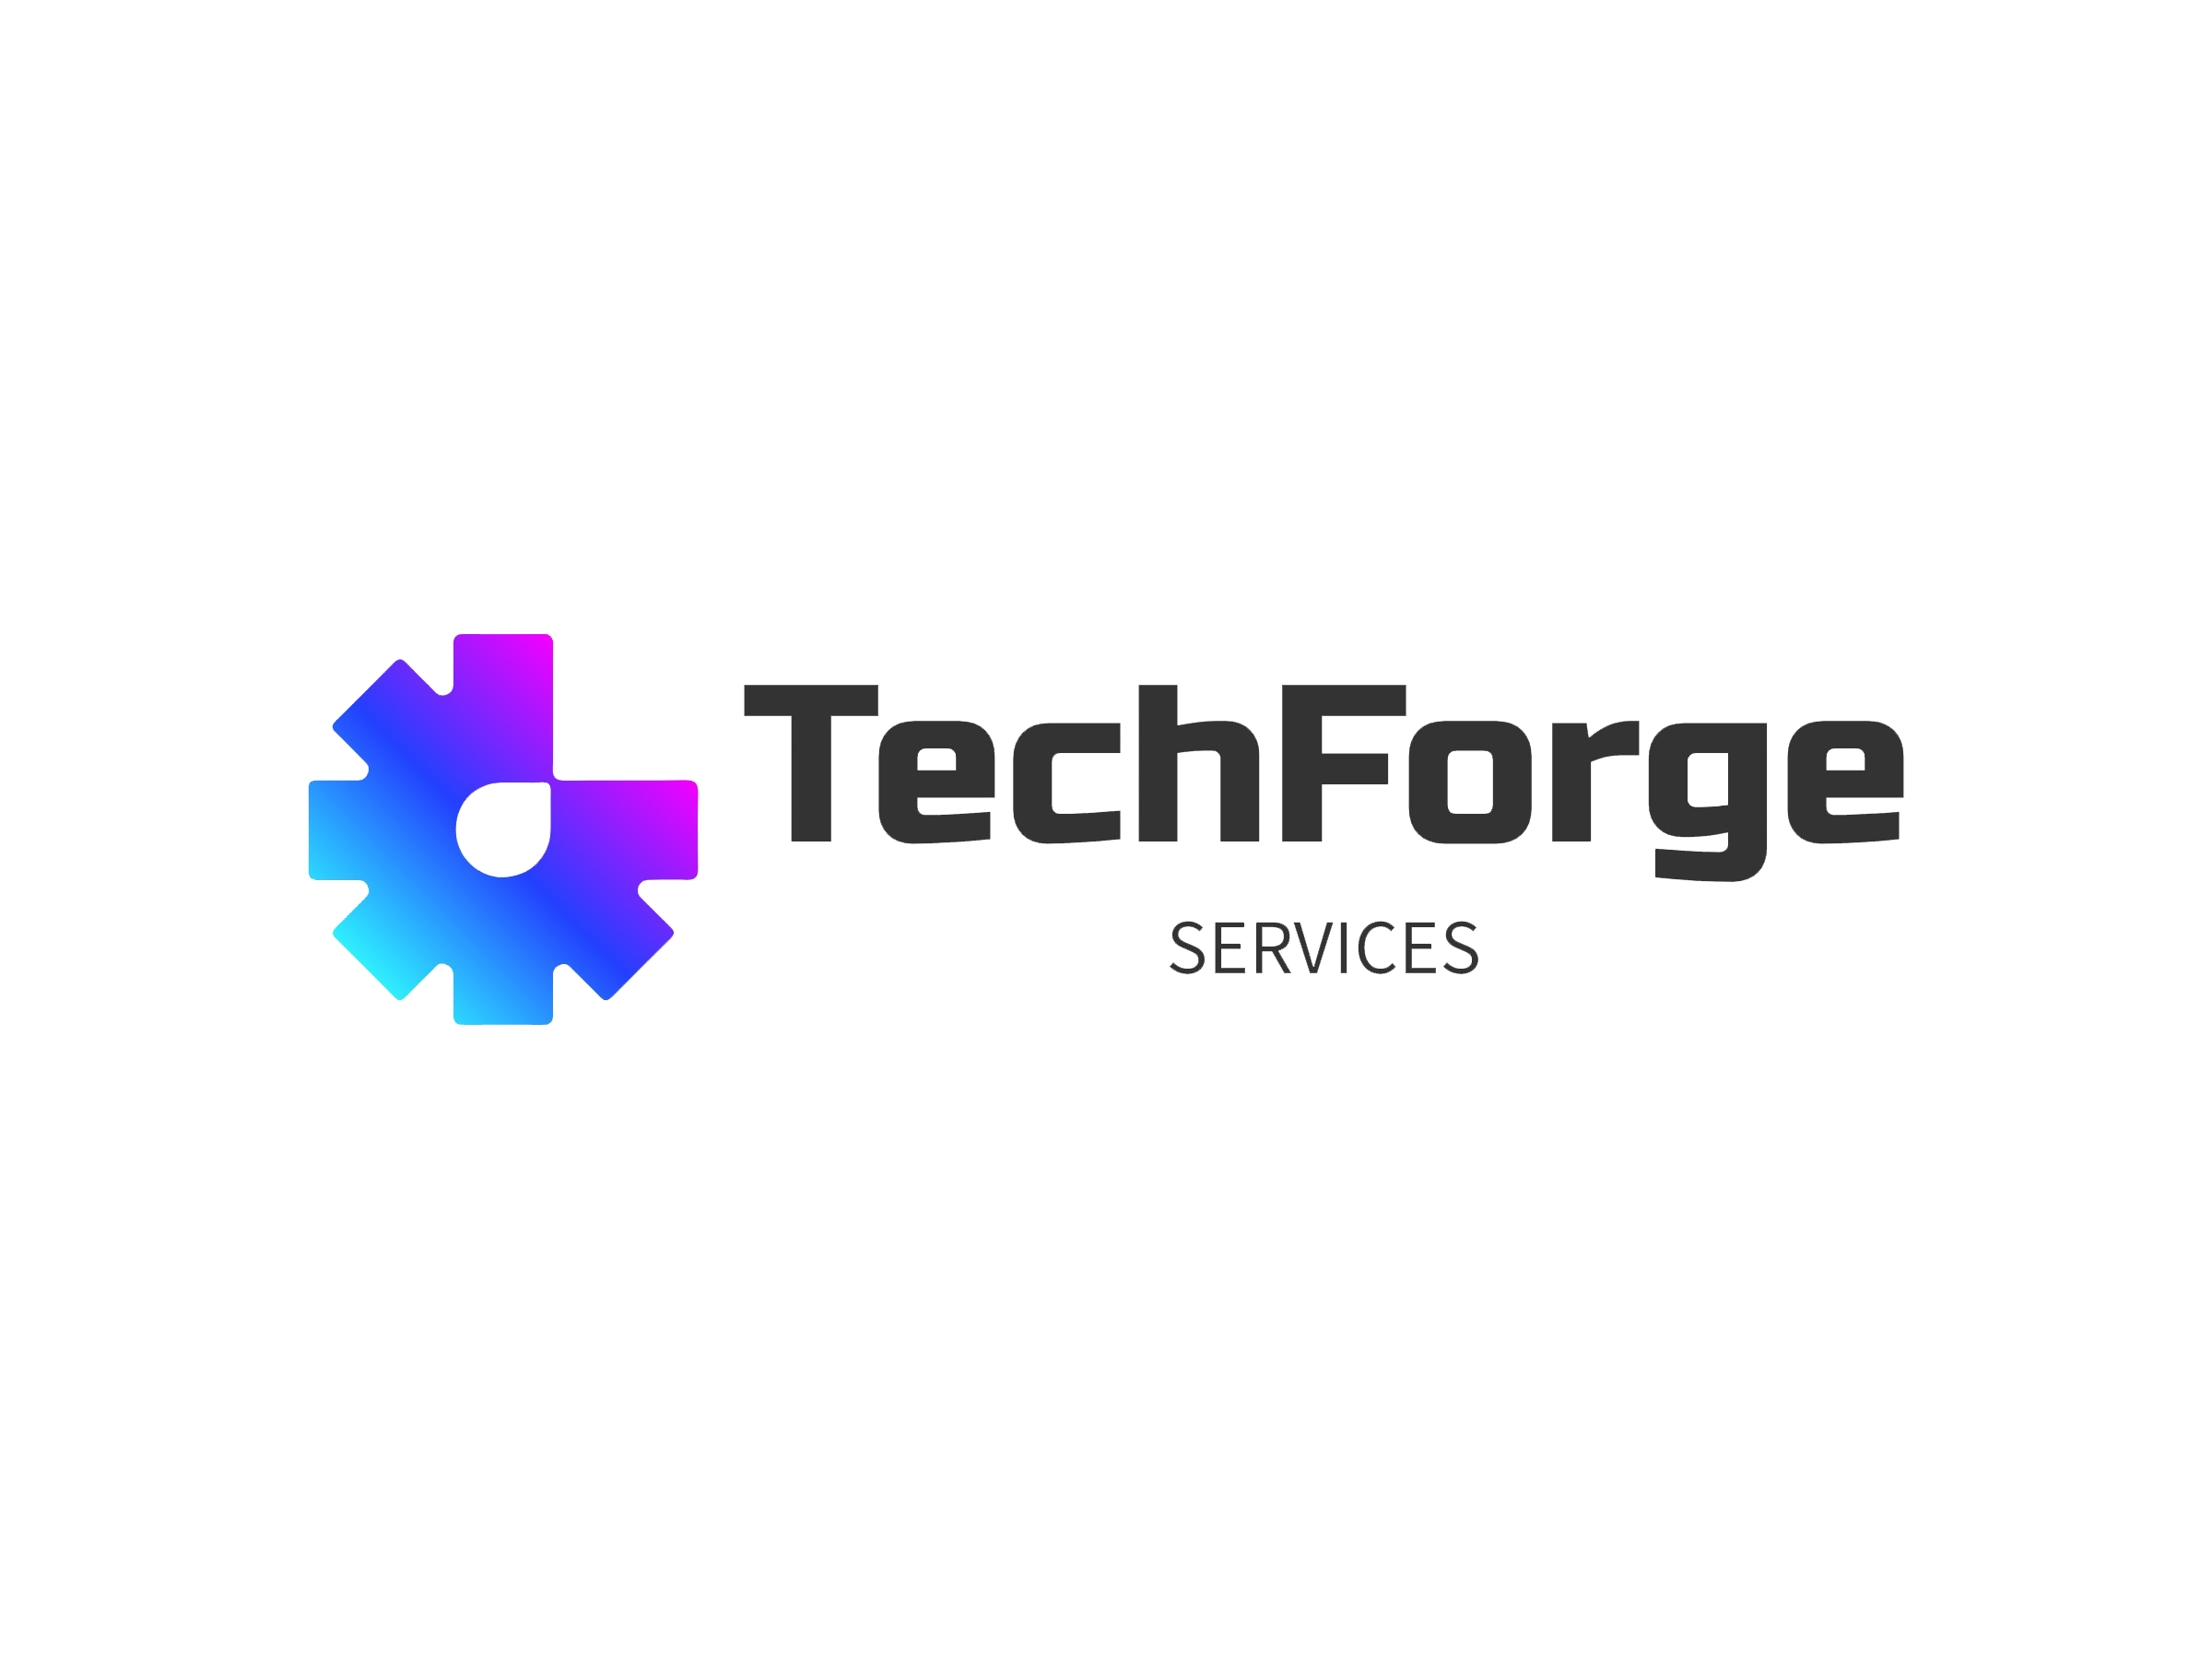 Tech Forge